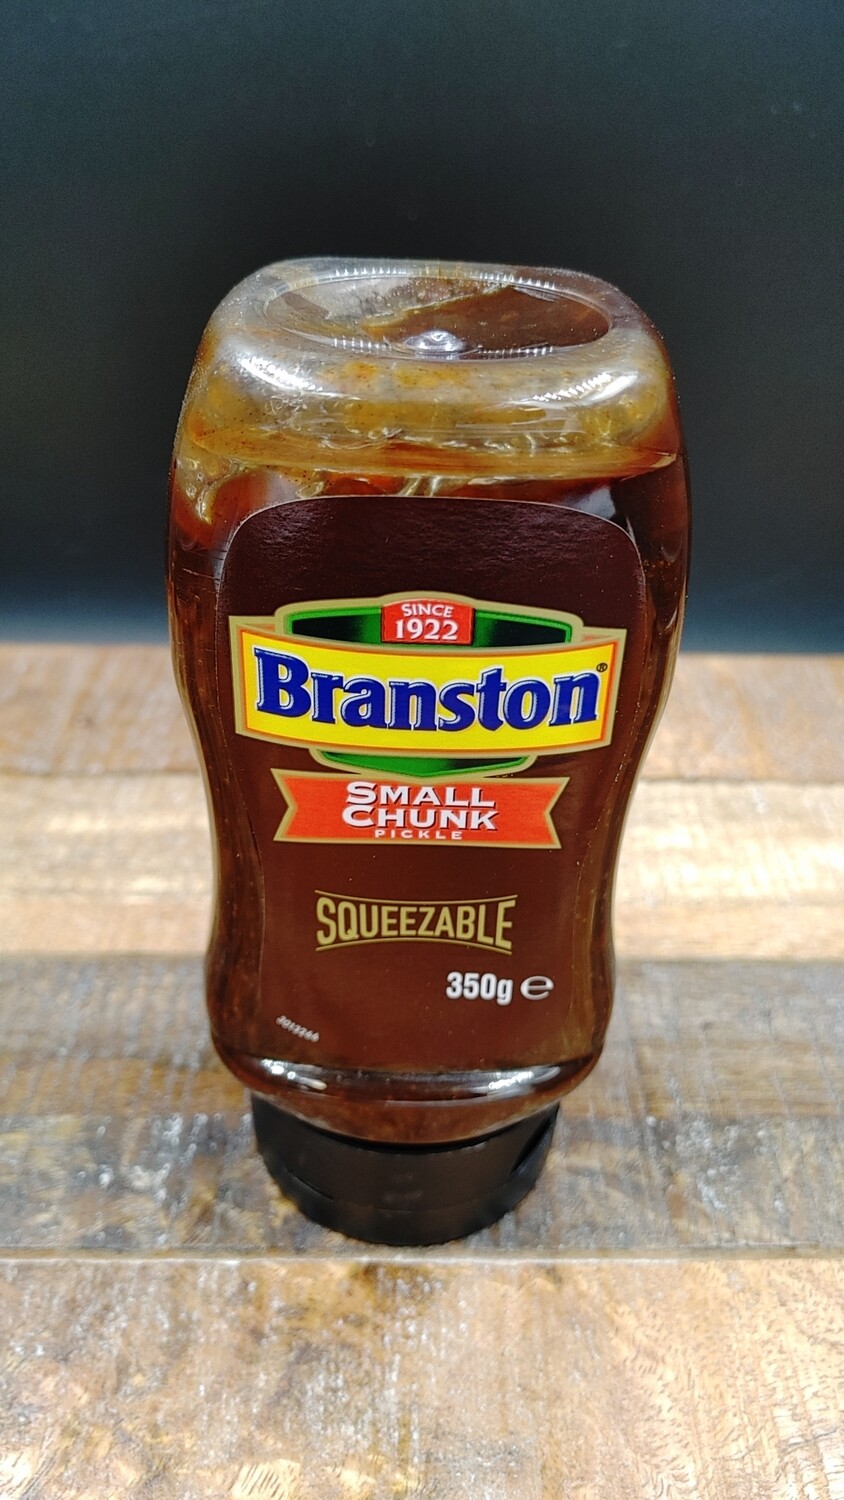 Branston Small Chunk Squeezy Bottle 350g